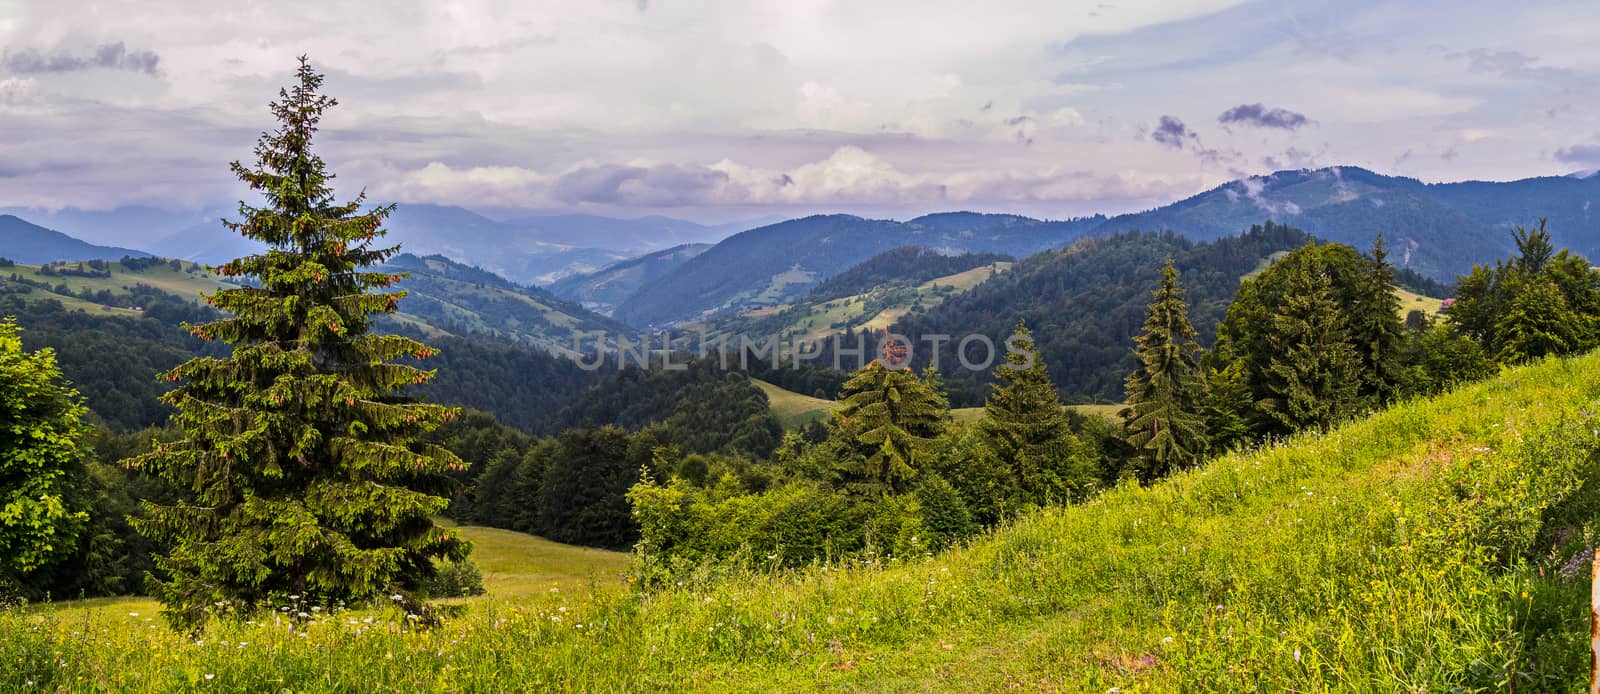 A panorama of forest massifs on mountain slopes and tops that touch upon clouds